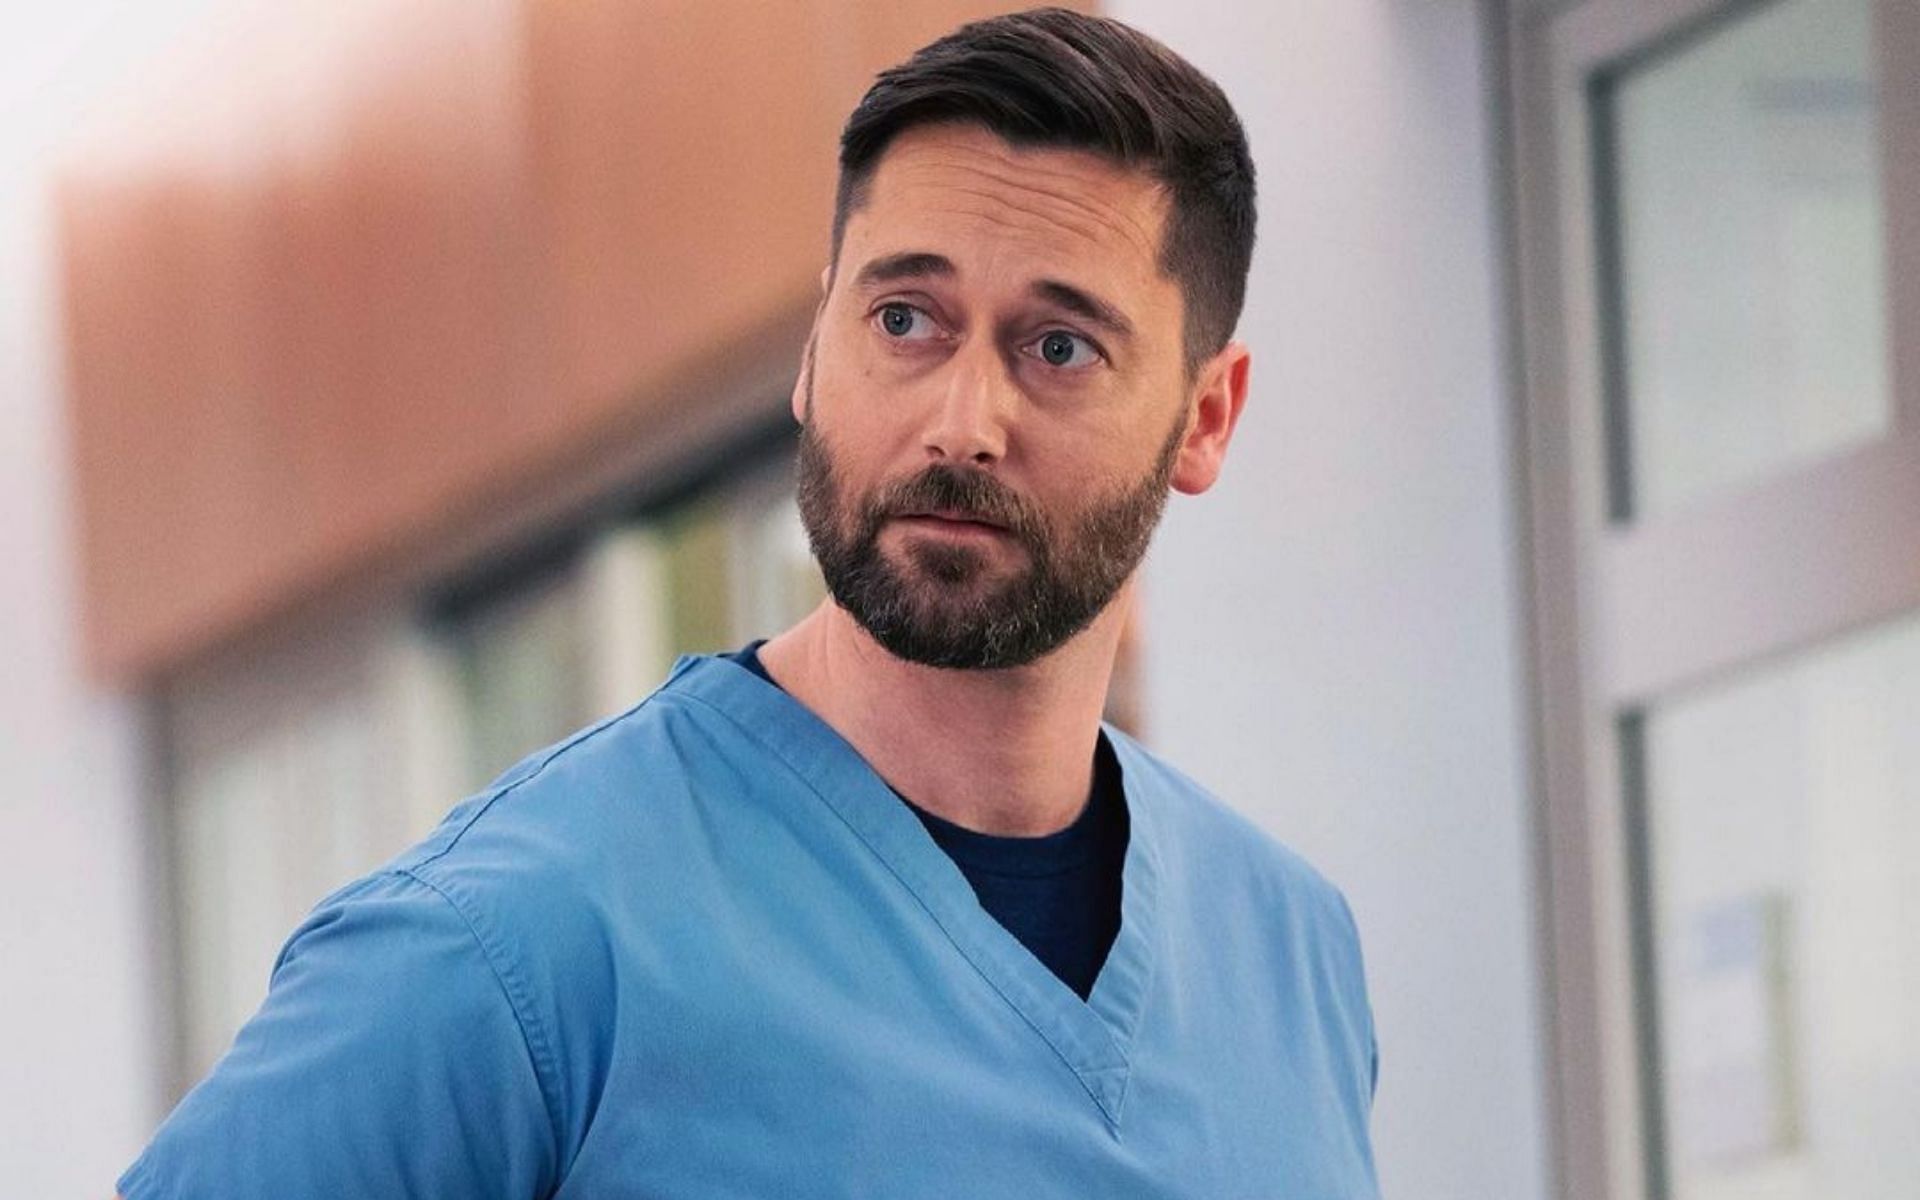 Ryan Eggold as Dr. Max Goodwin in a scene from New Amsterdam (Image via ryaneggold/ Instagram)